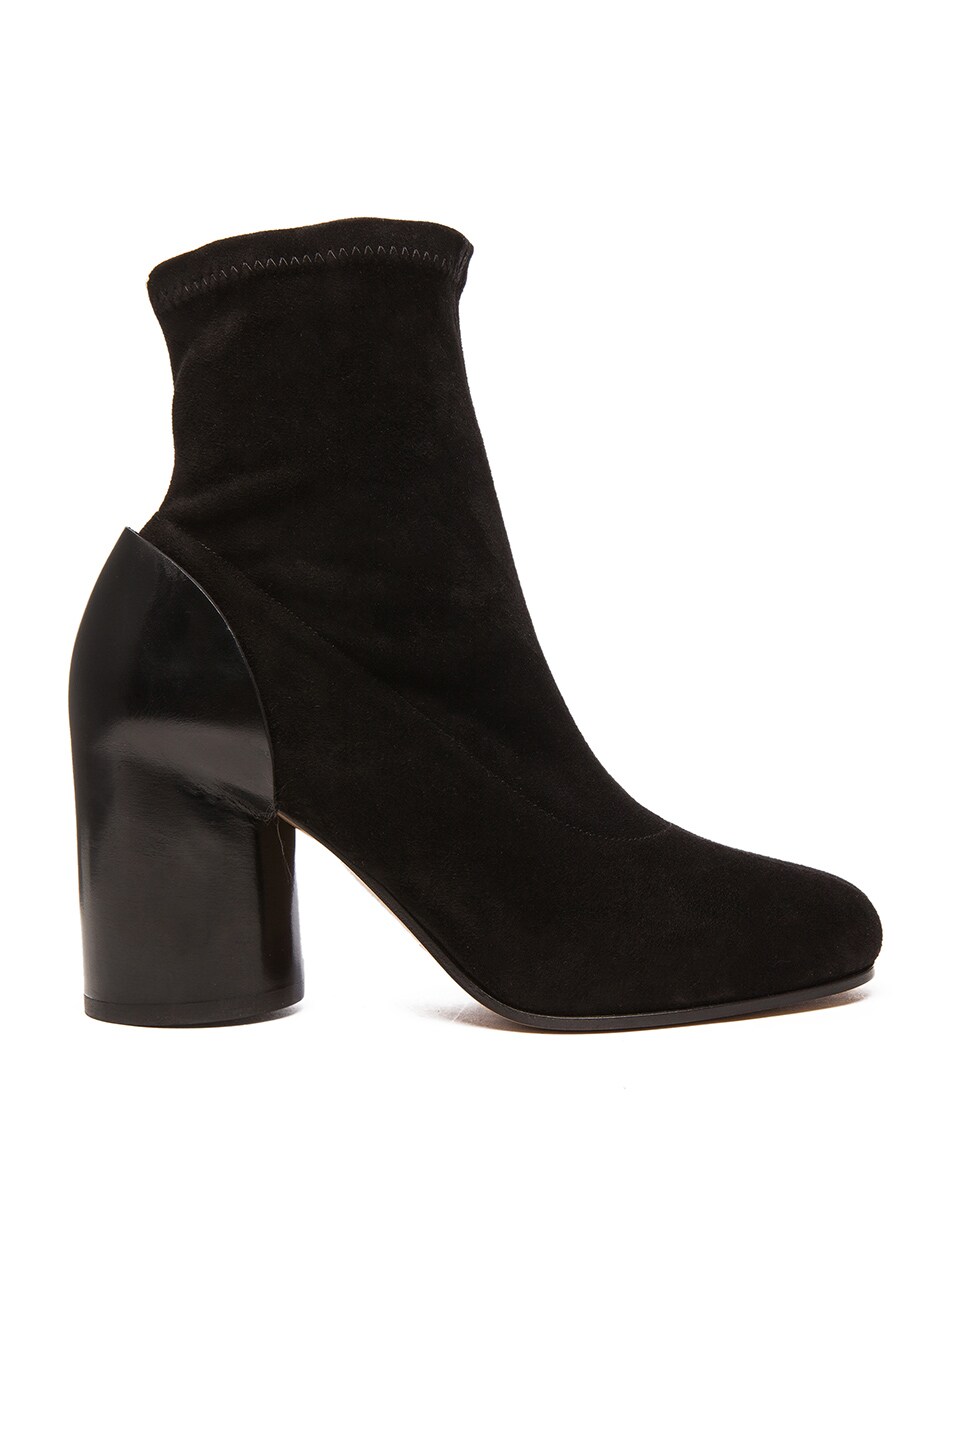 Image 1 of Maison Margiela Suede Sock Boots in Black